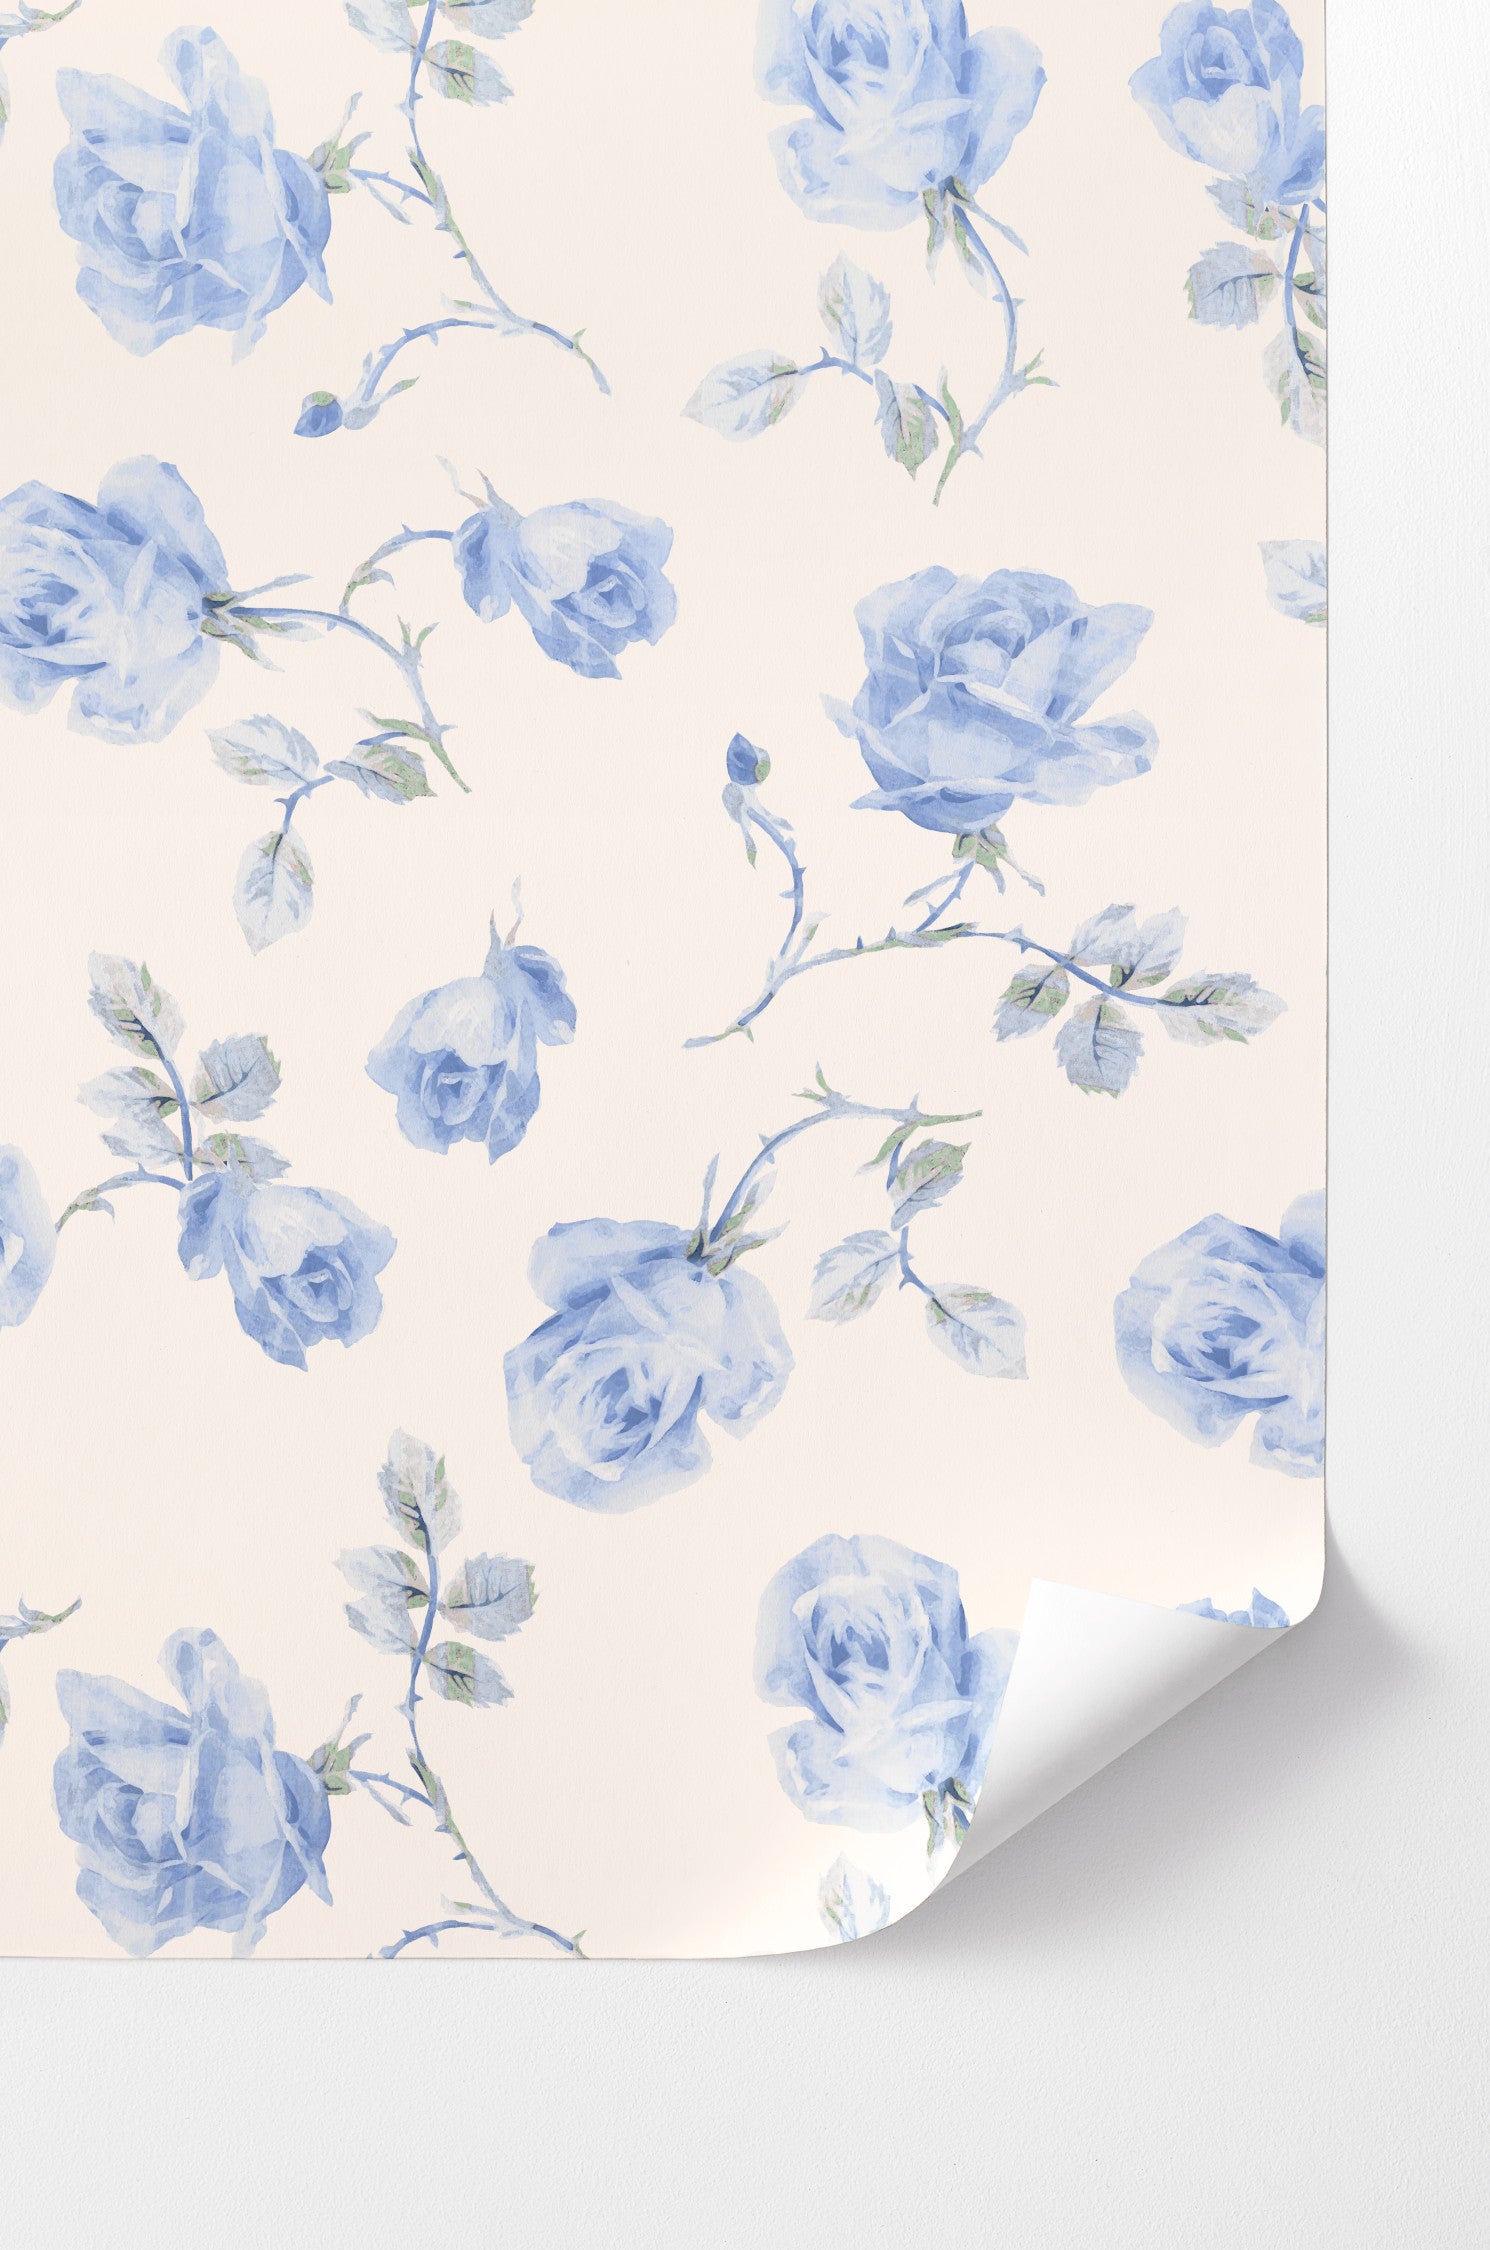 Introducing a delicate rose print wallpaper featuring an antique white background. This wallpaper exudes elegance with its large, intricately detailed blue roses.